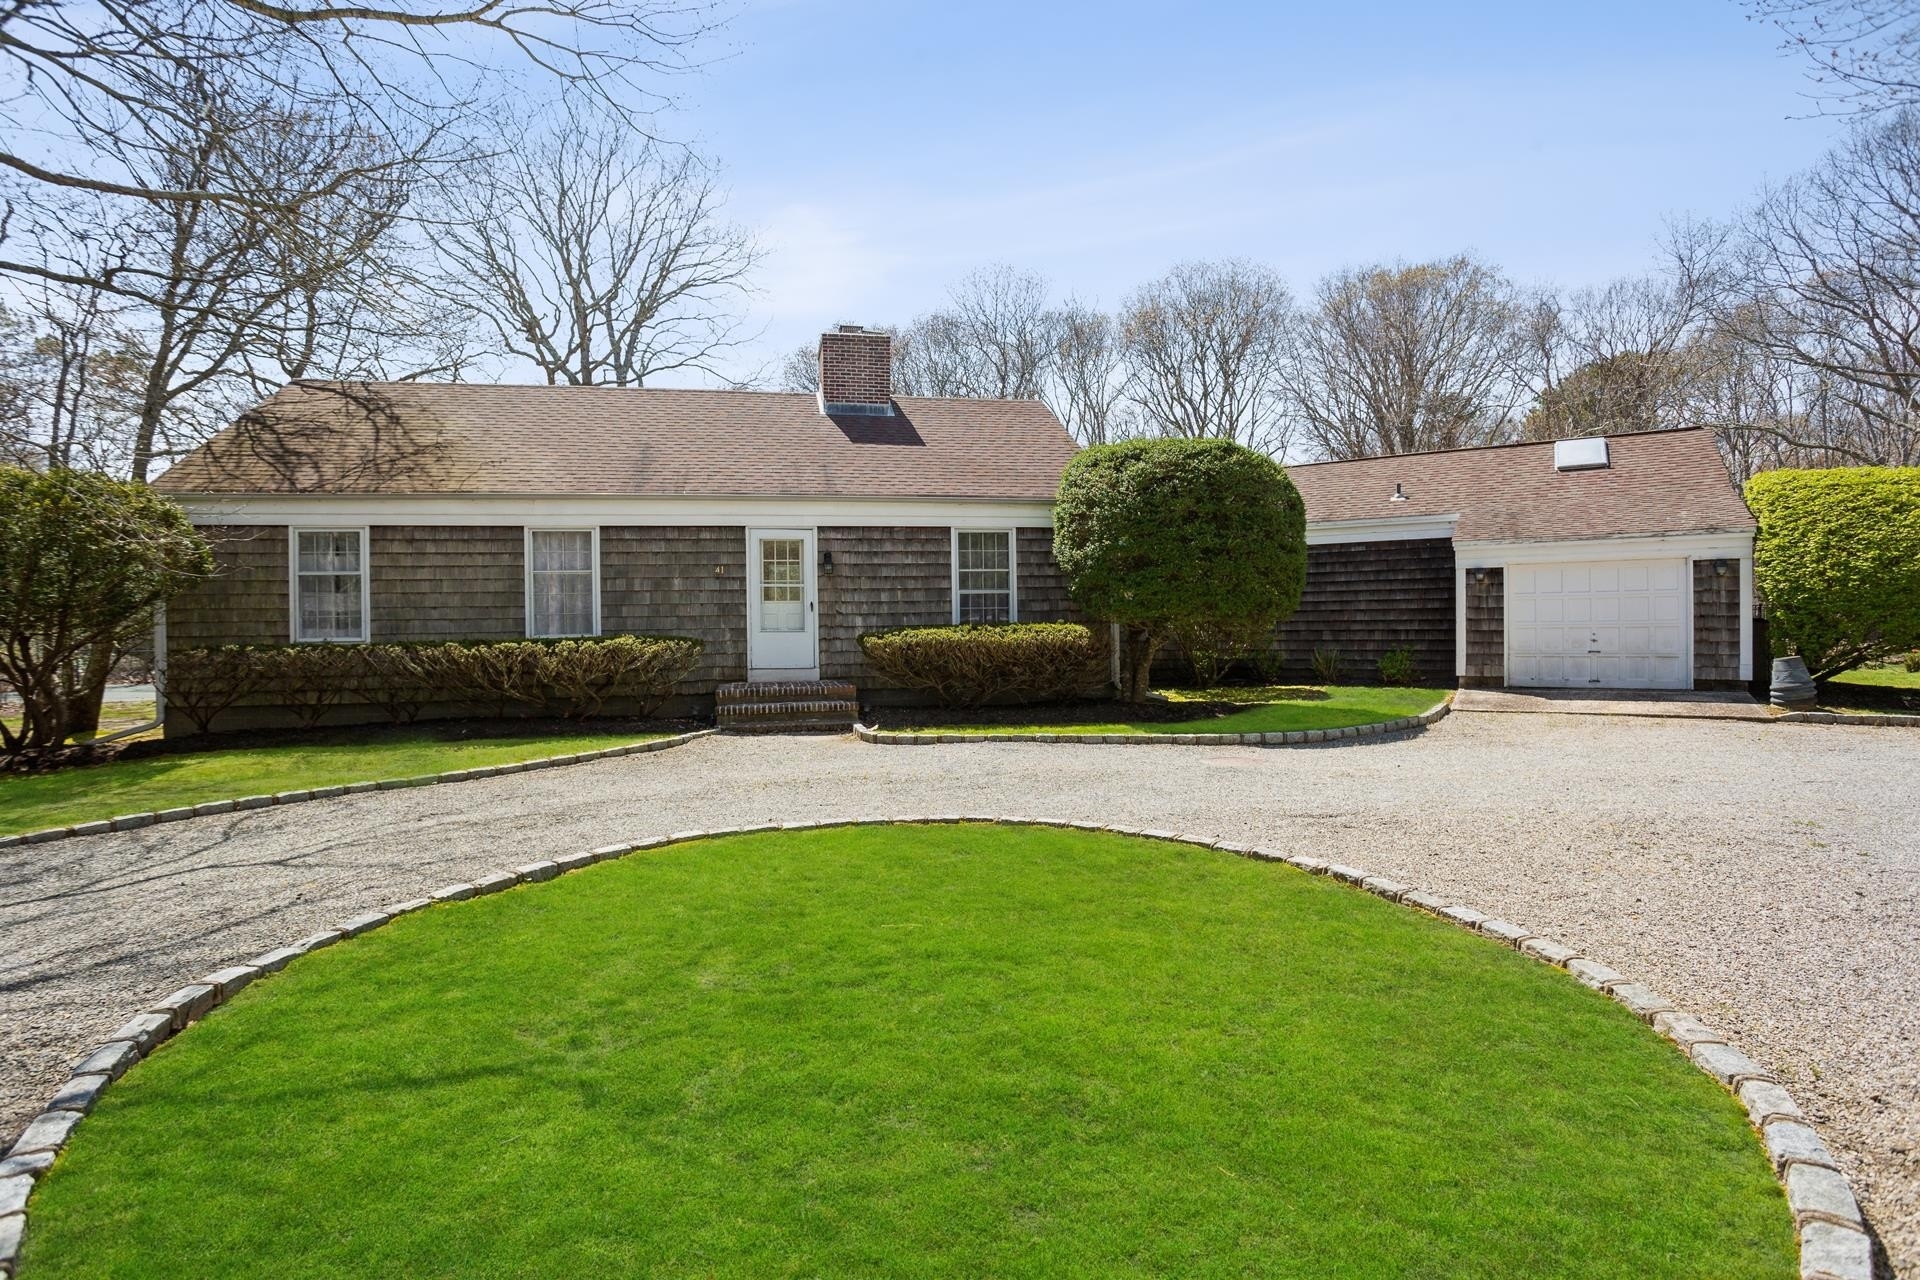 Single Family Home at Quogue Village, New York 11959